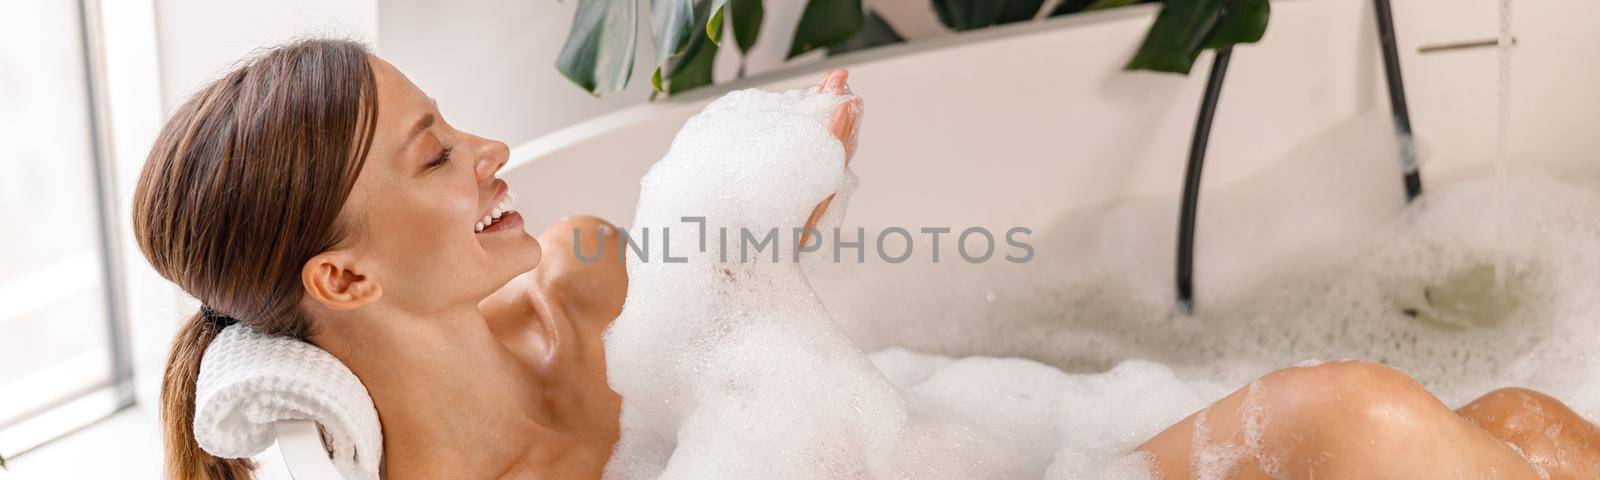 Bathing young woman relaxing in bath, smiling and playing with bubble foam by Yaroslav_astakhov